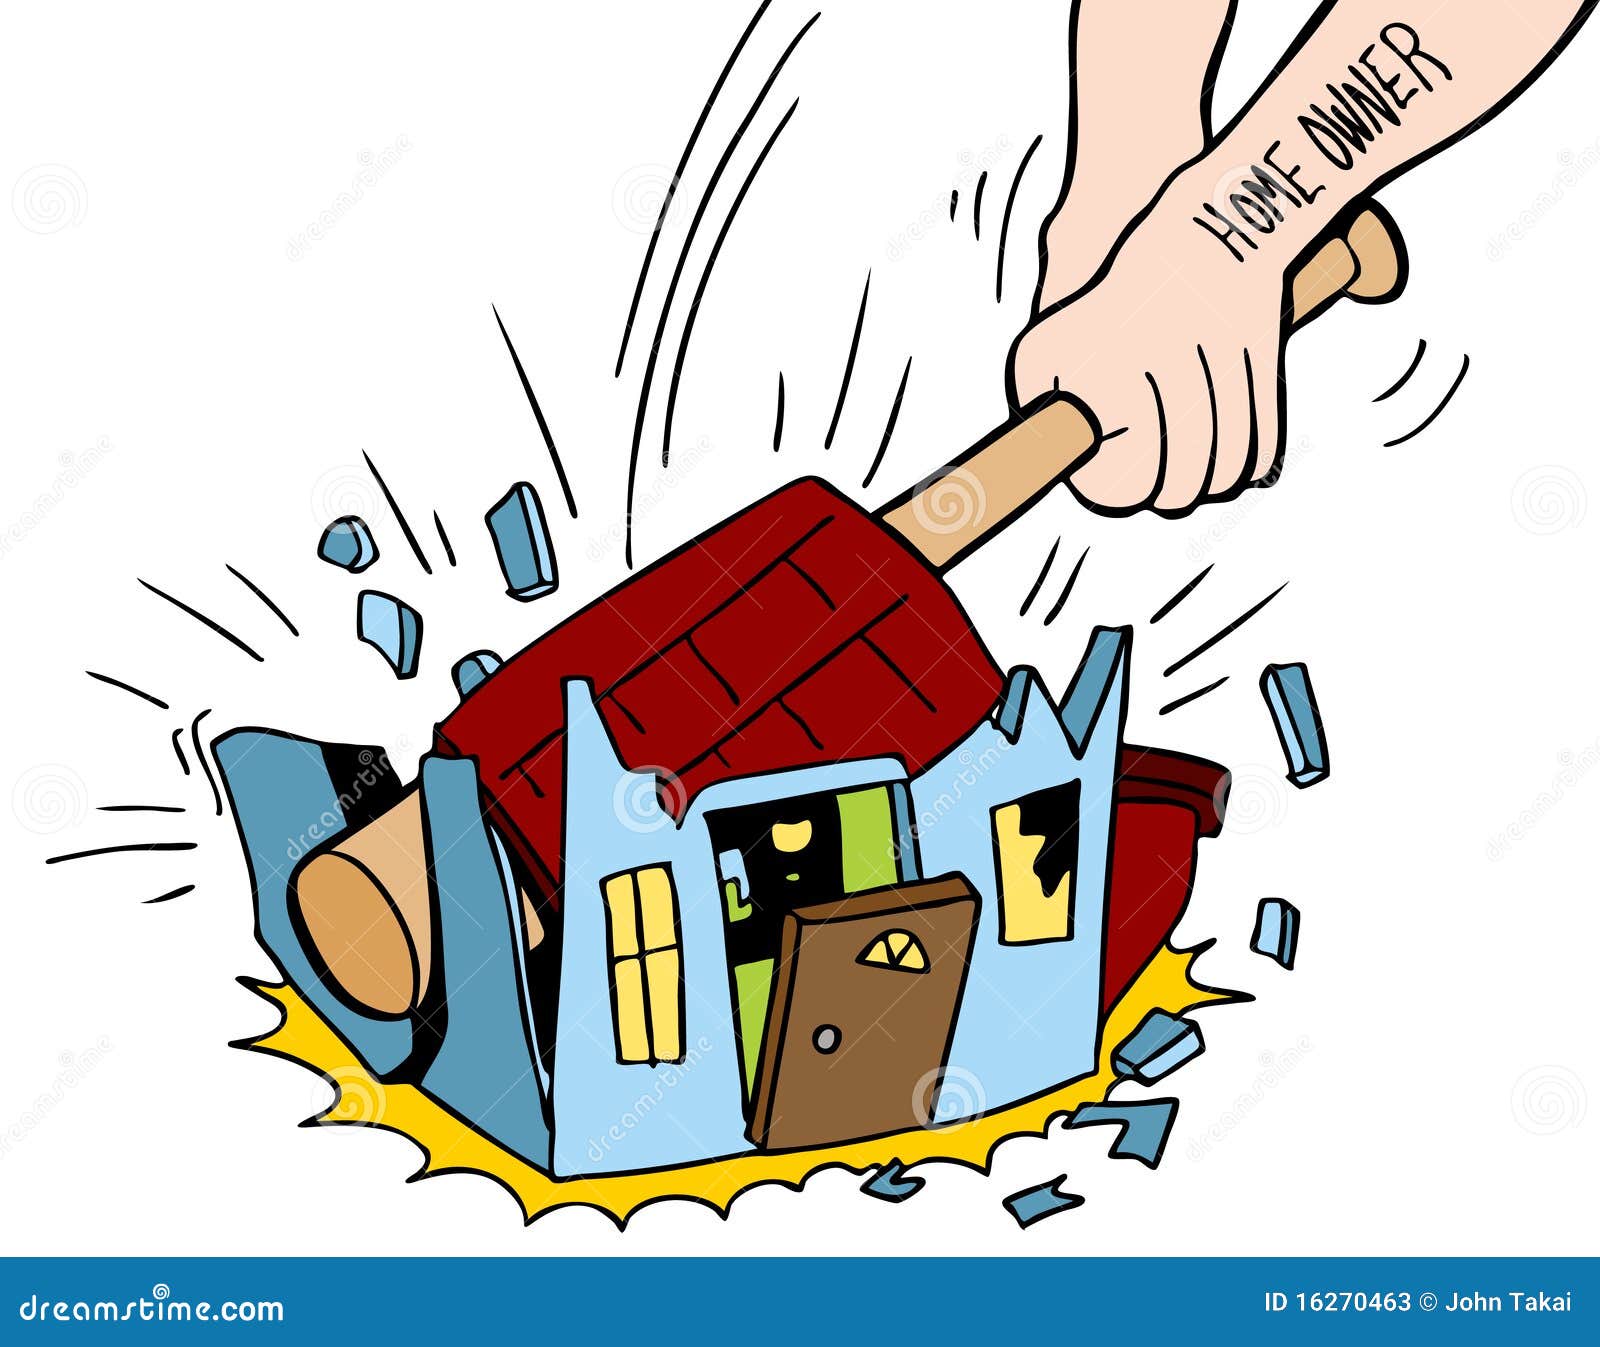 destroyed house clipart - photo #4